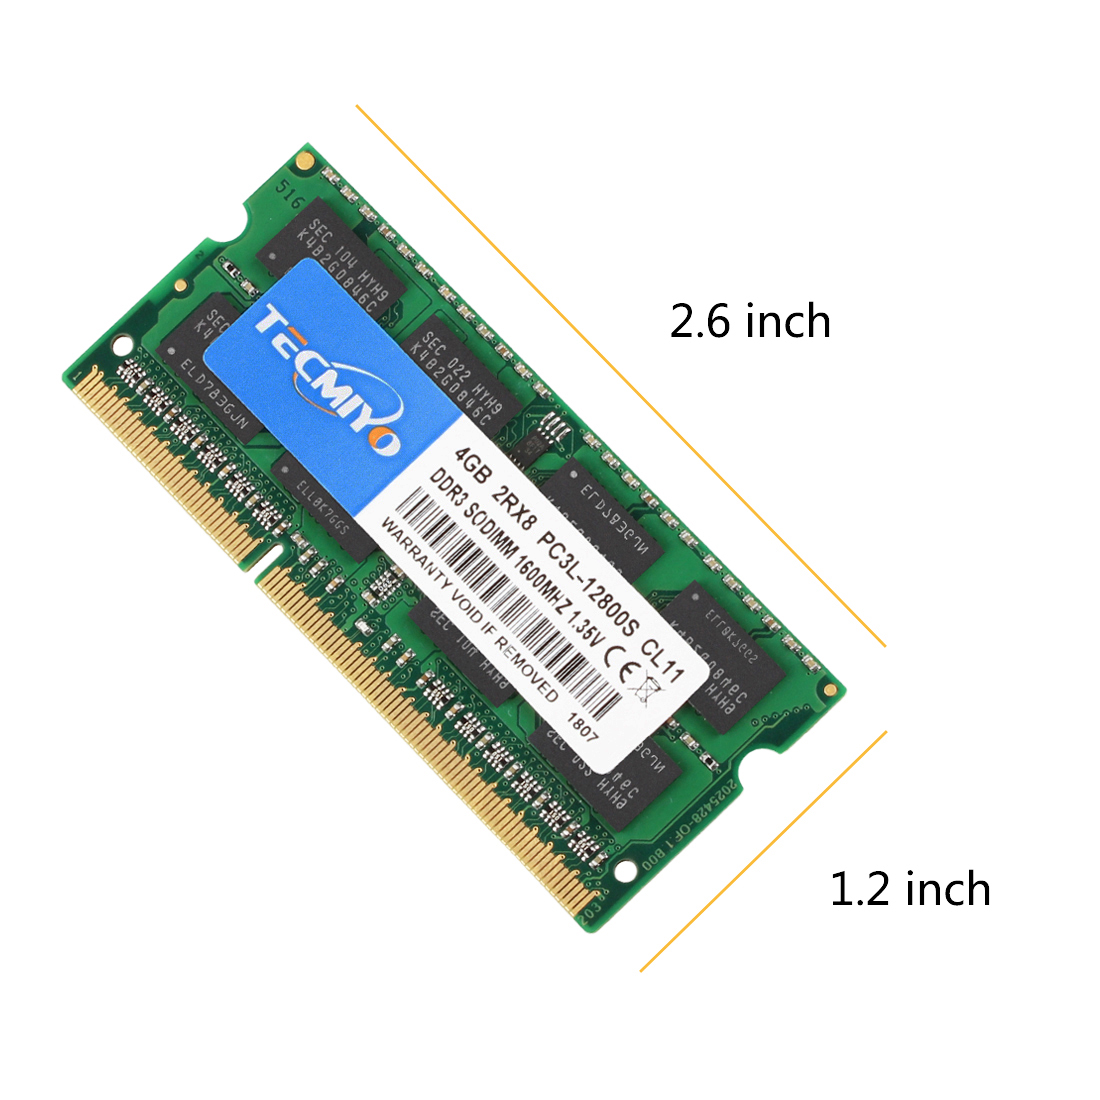 PC3-12800 parts-quick 8GB Memory Module for Dell Vostro 3015 DDR3L Low Voltage 1600 MHz SODIMM Notebook Compatible RAM